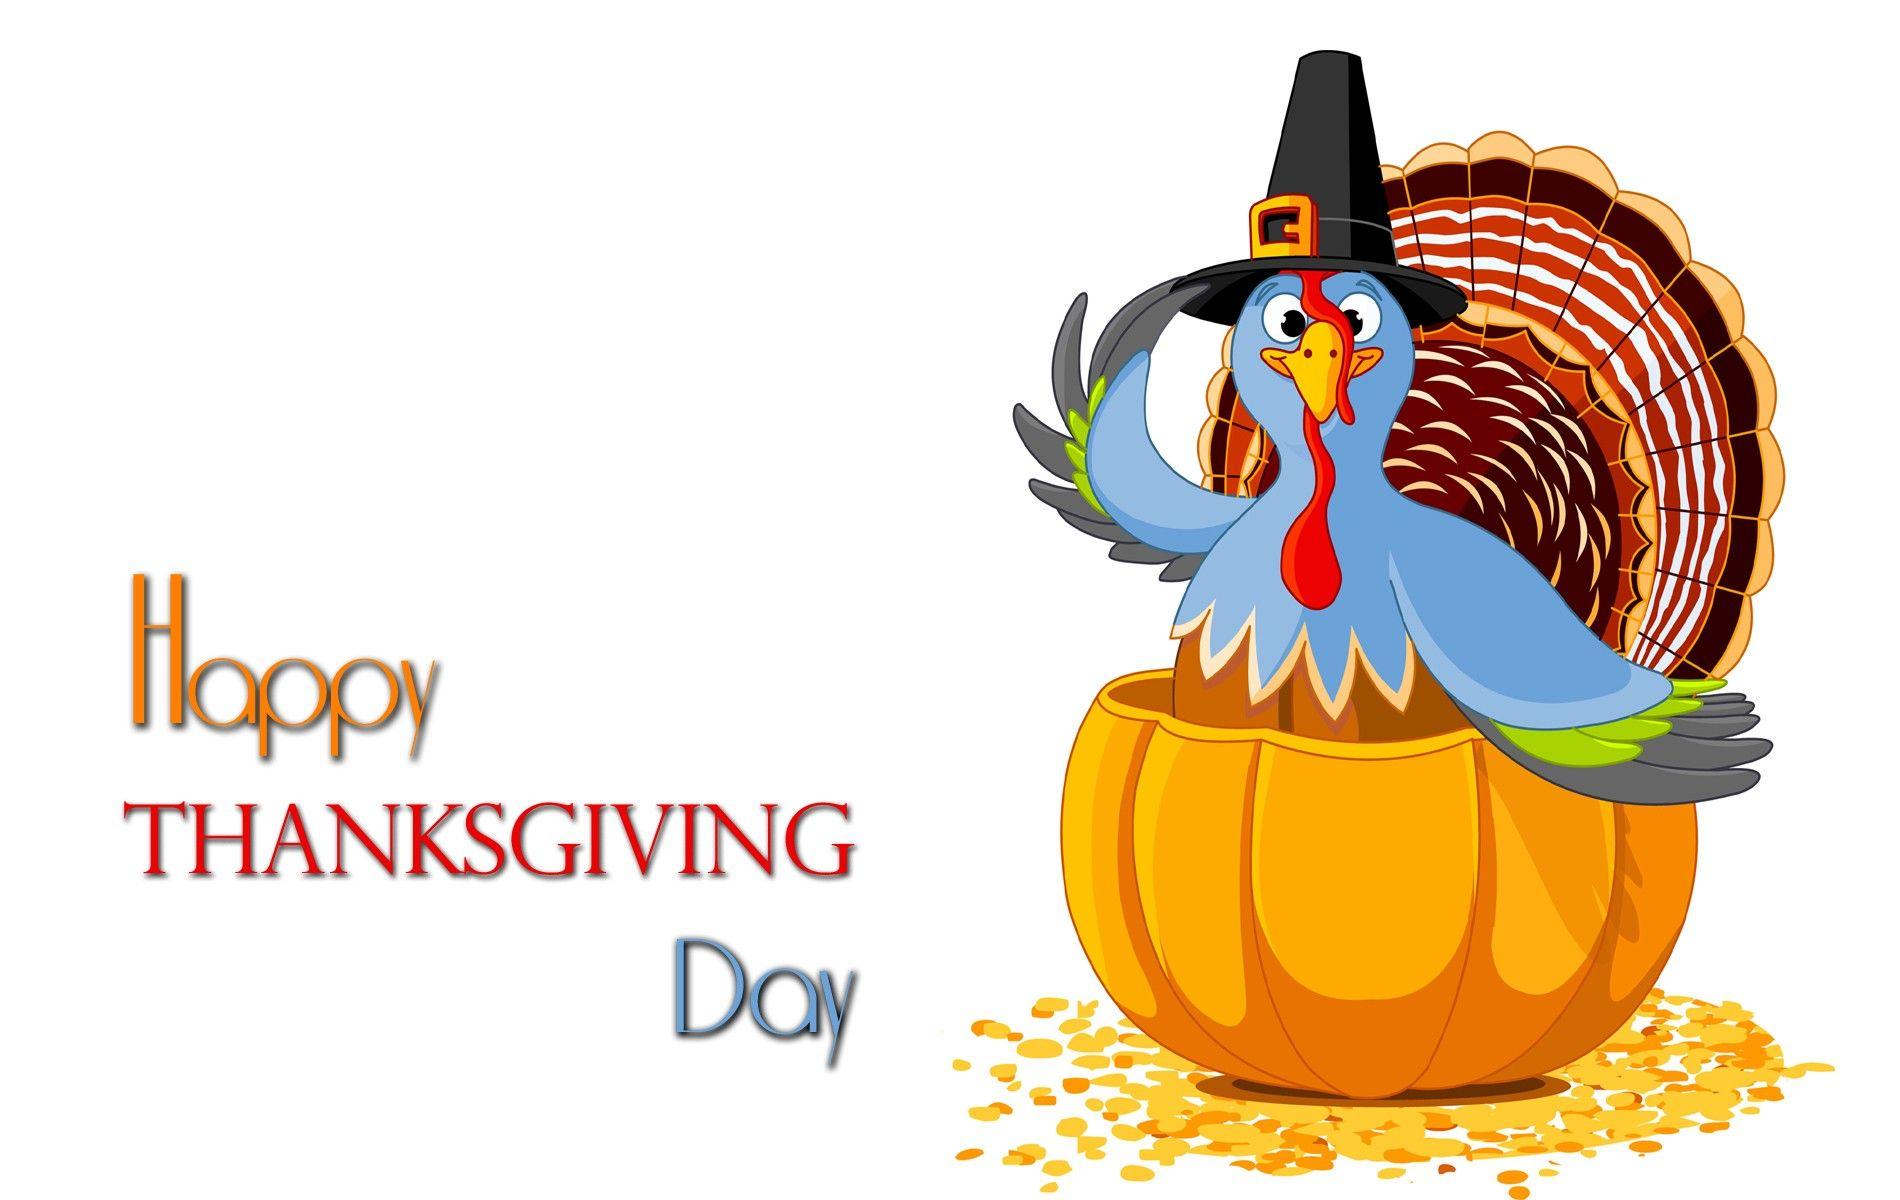 Happy Thanksgiving Day 2018, Thanksgiving Day Quotes, Wishes, SMS